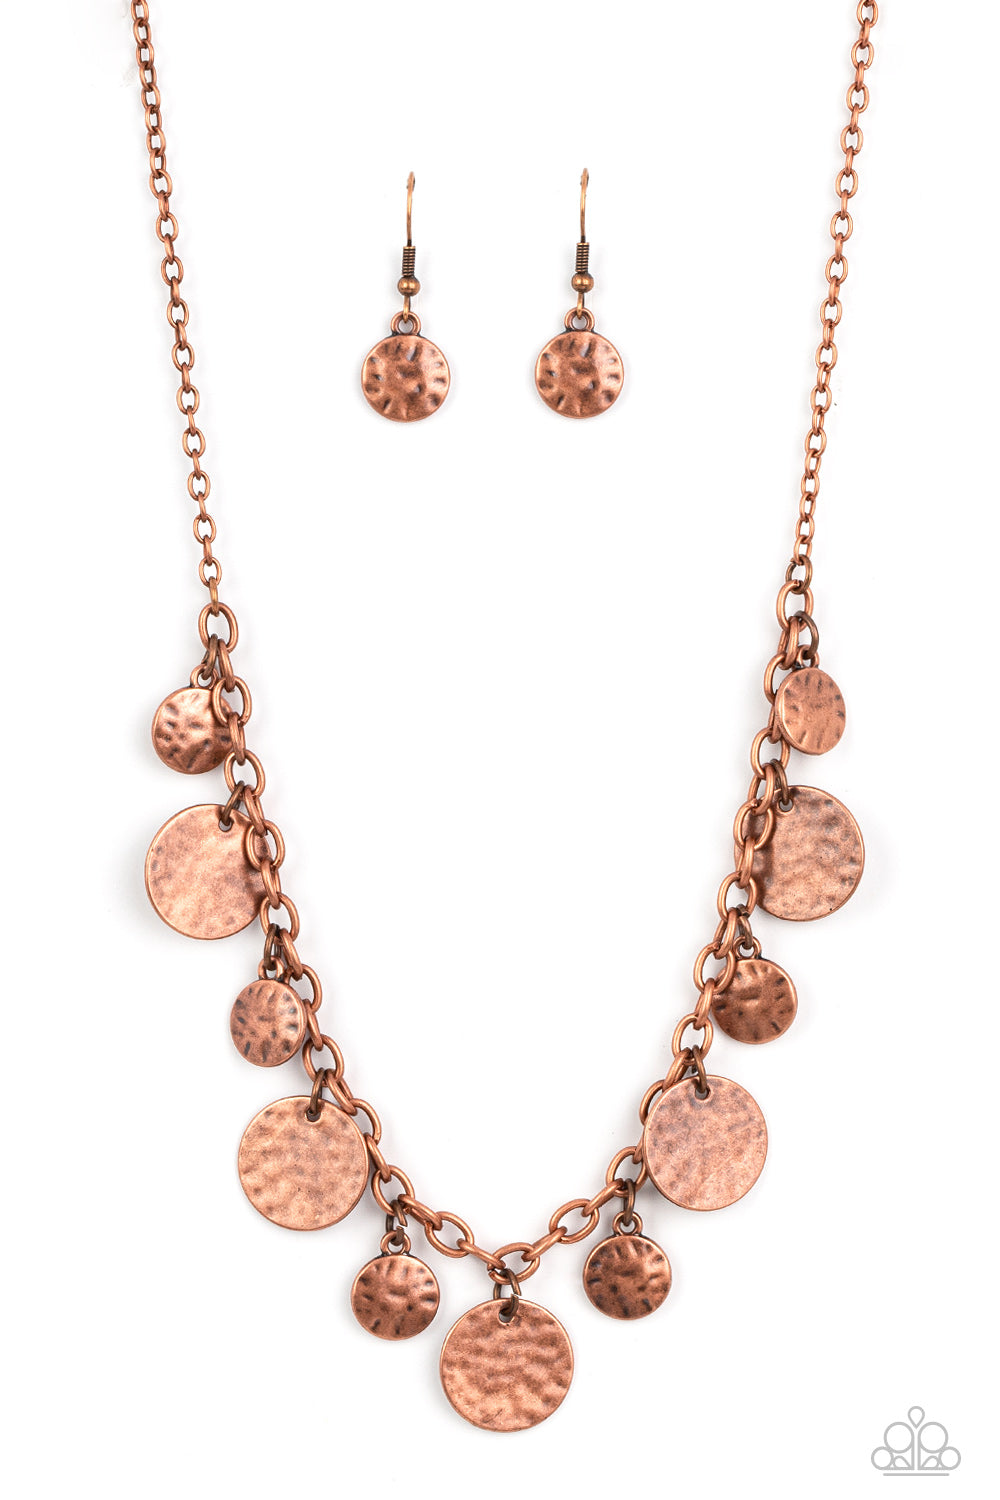 Model Medallions - Copper Necklace - Paparazzi Accessories - Copper discs in a variety of sizes dance along a copper chain in a charming display. The discs are hammered in texture, adding rustic, handcrafted detail to the design.